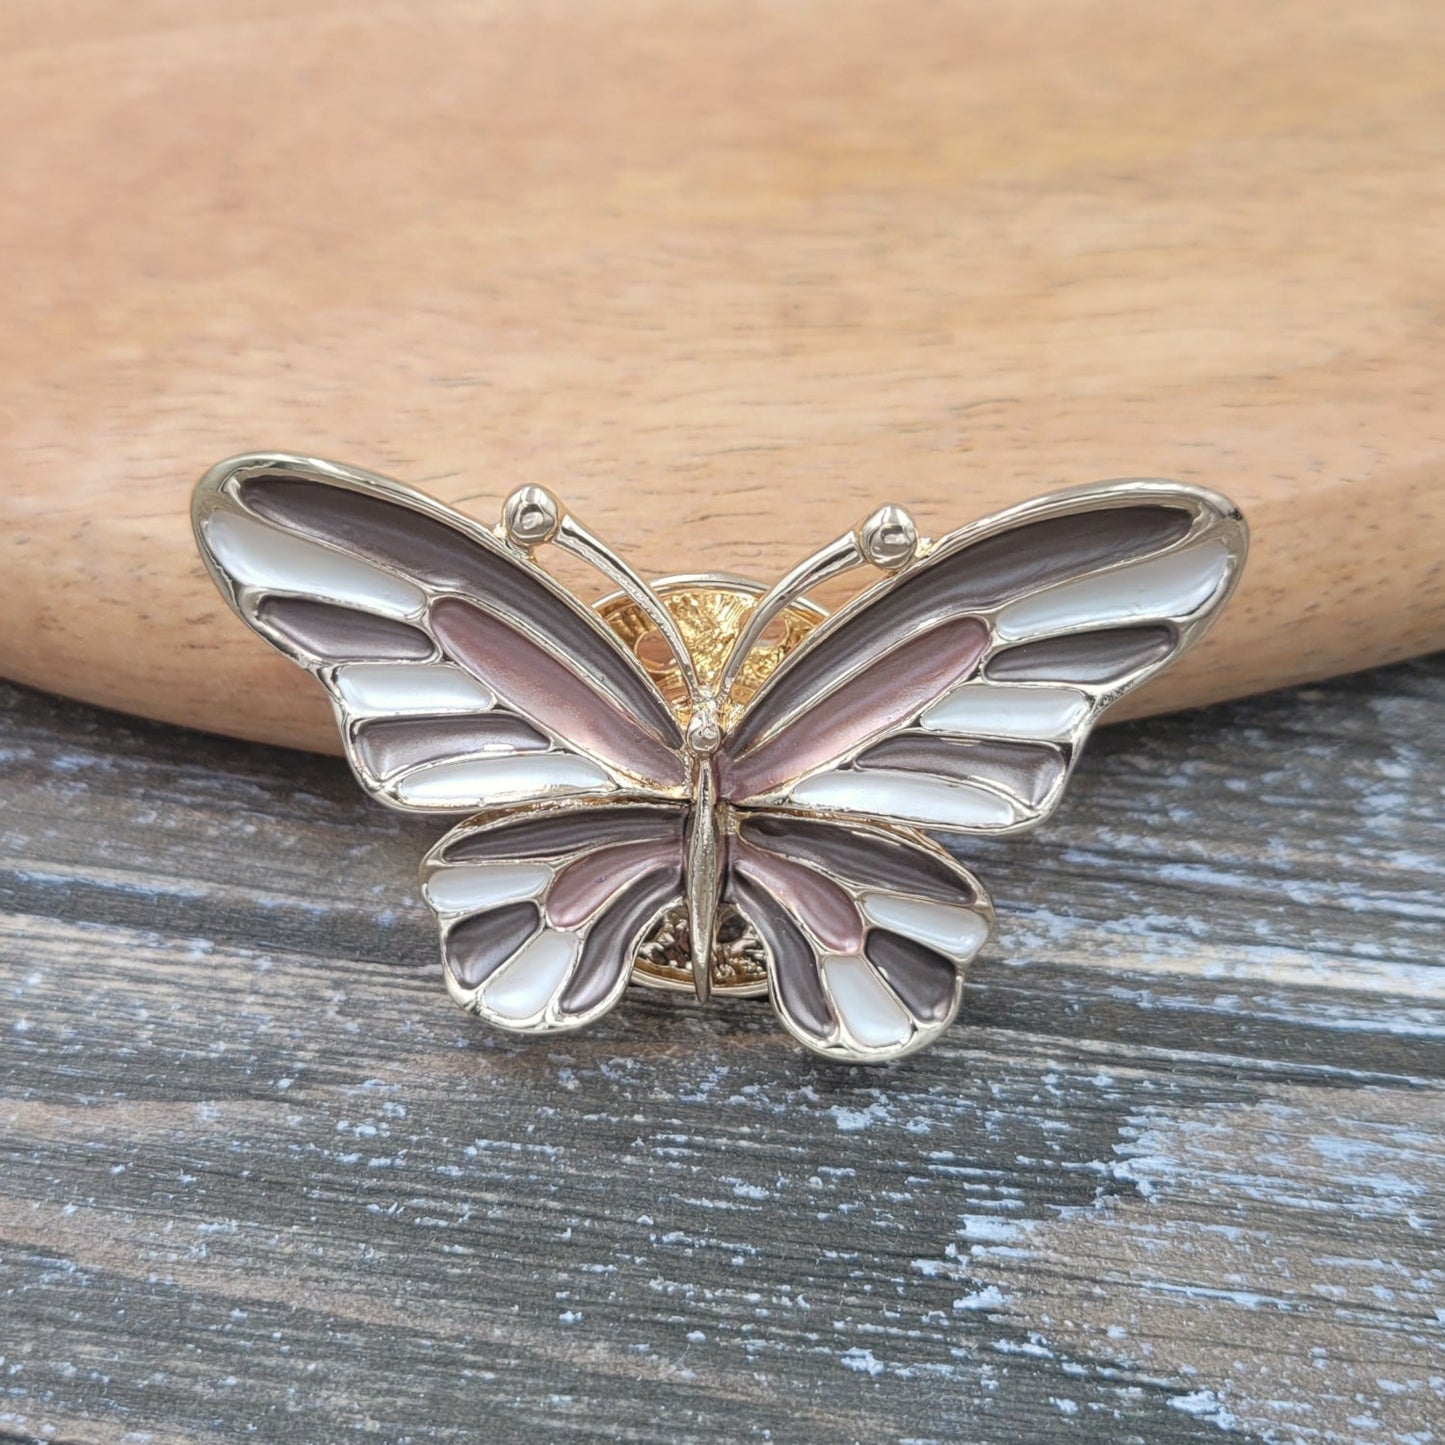 BESHEEK Goldtone Brown Butterfly Magnetic Professional Artisan Brooch Pin | Handmade Hypoallergenic Office, Suit, Networking Style Jewelry